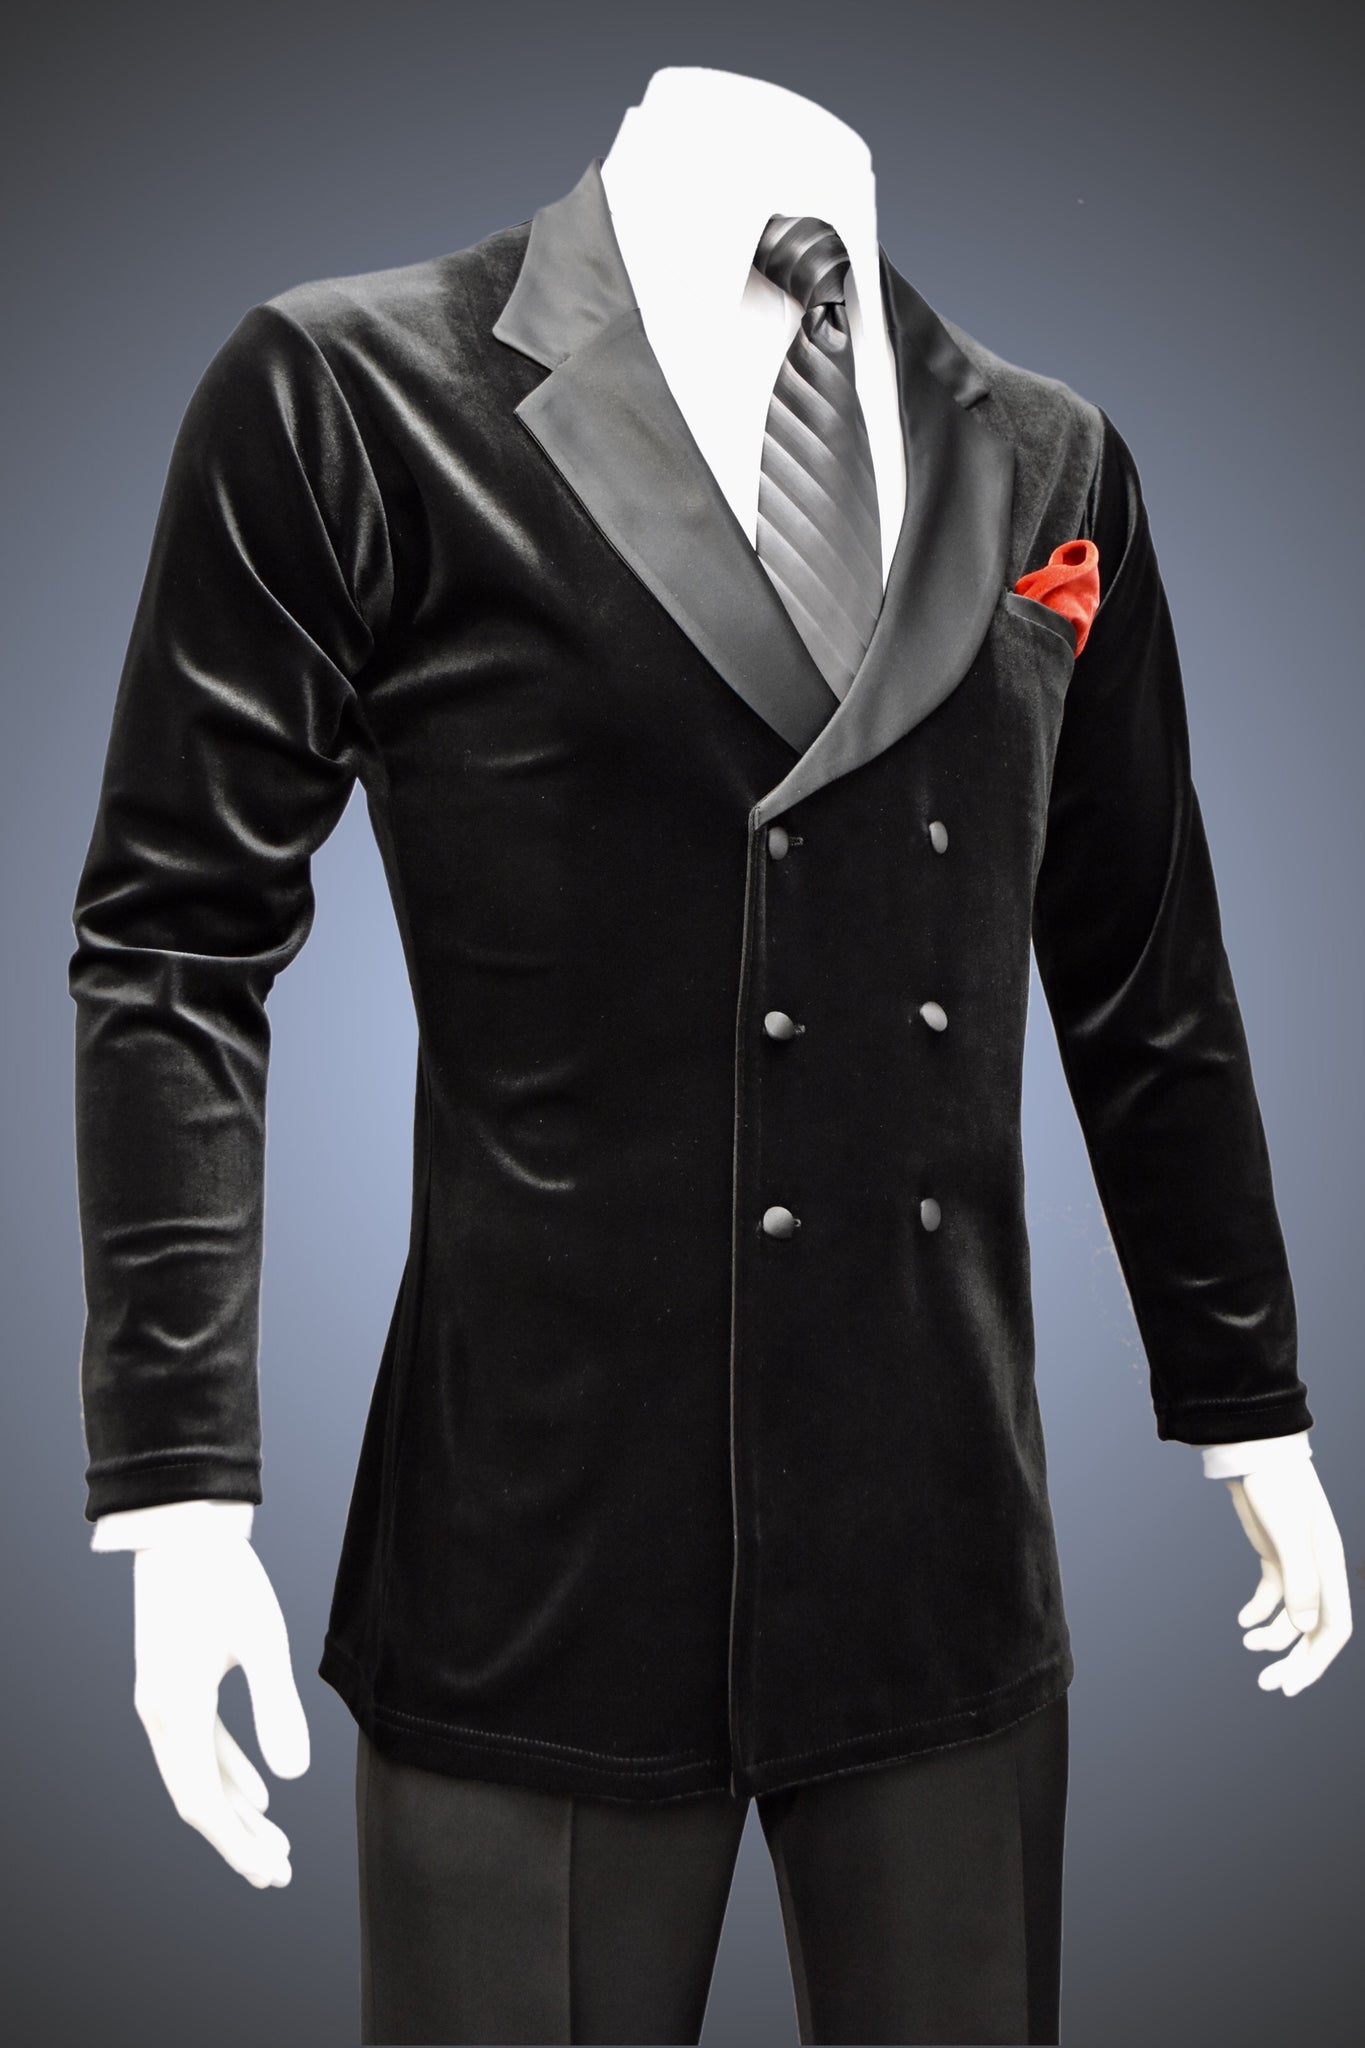 Men’s Double-Breasted Velvet Lounge Smooth Jacket - JK101 - Jacket by Randall Ready